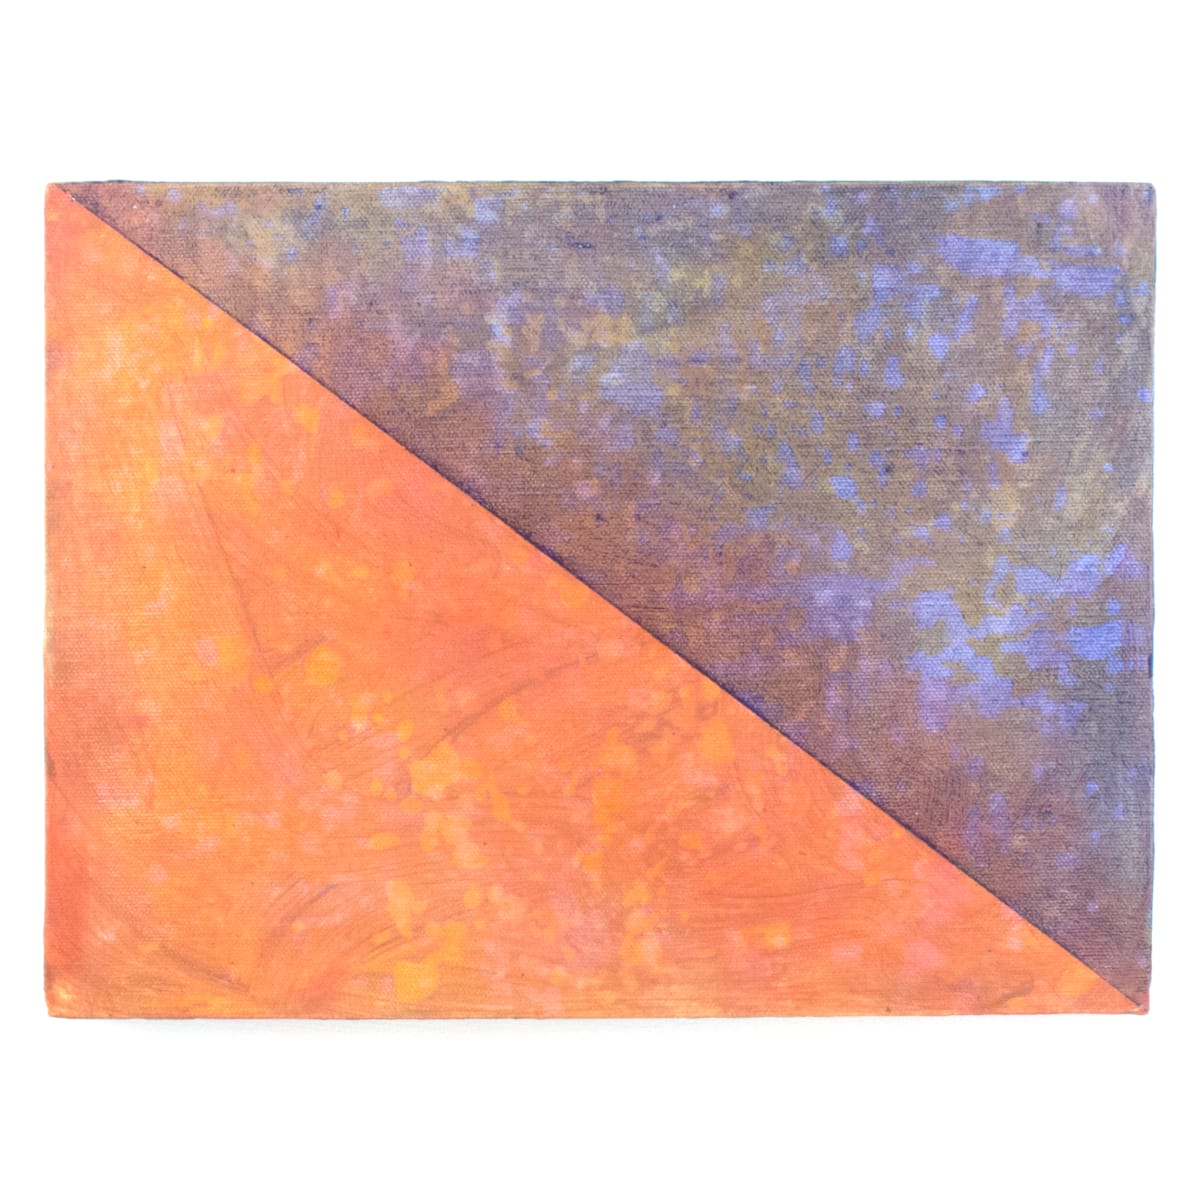 Diagonal 4 by Bruce Price  Image: Diagonal 4
acrylic on canvas
9"x12"